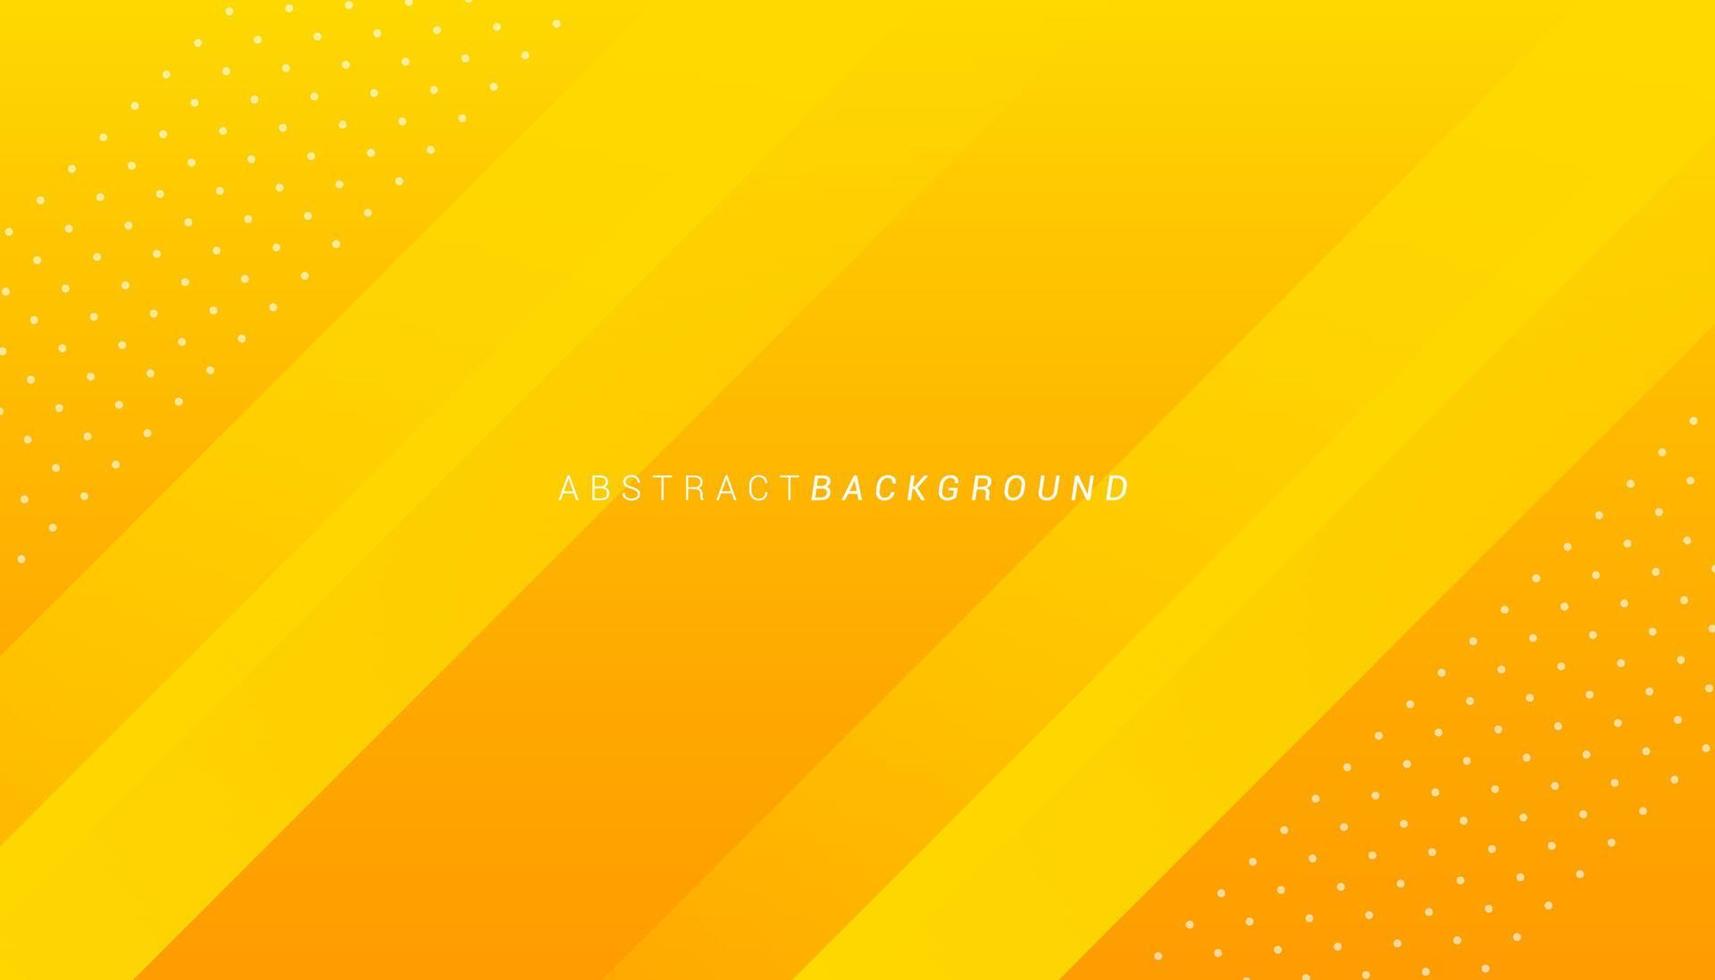 Orange and yellow gradient background with dynamic abstract shapes. Vector illustration